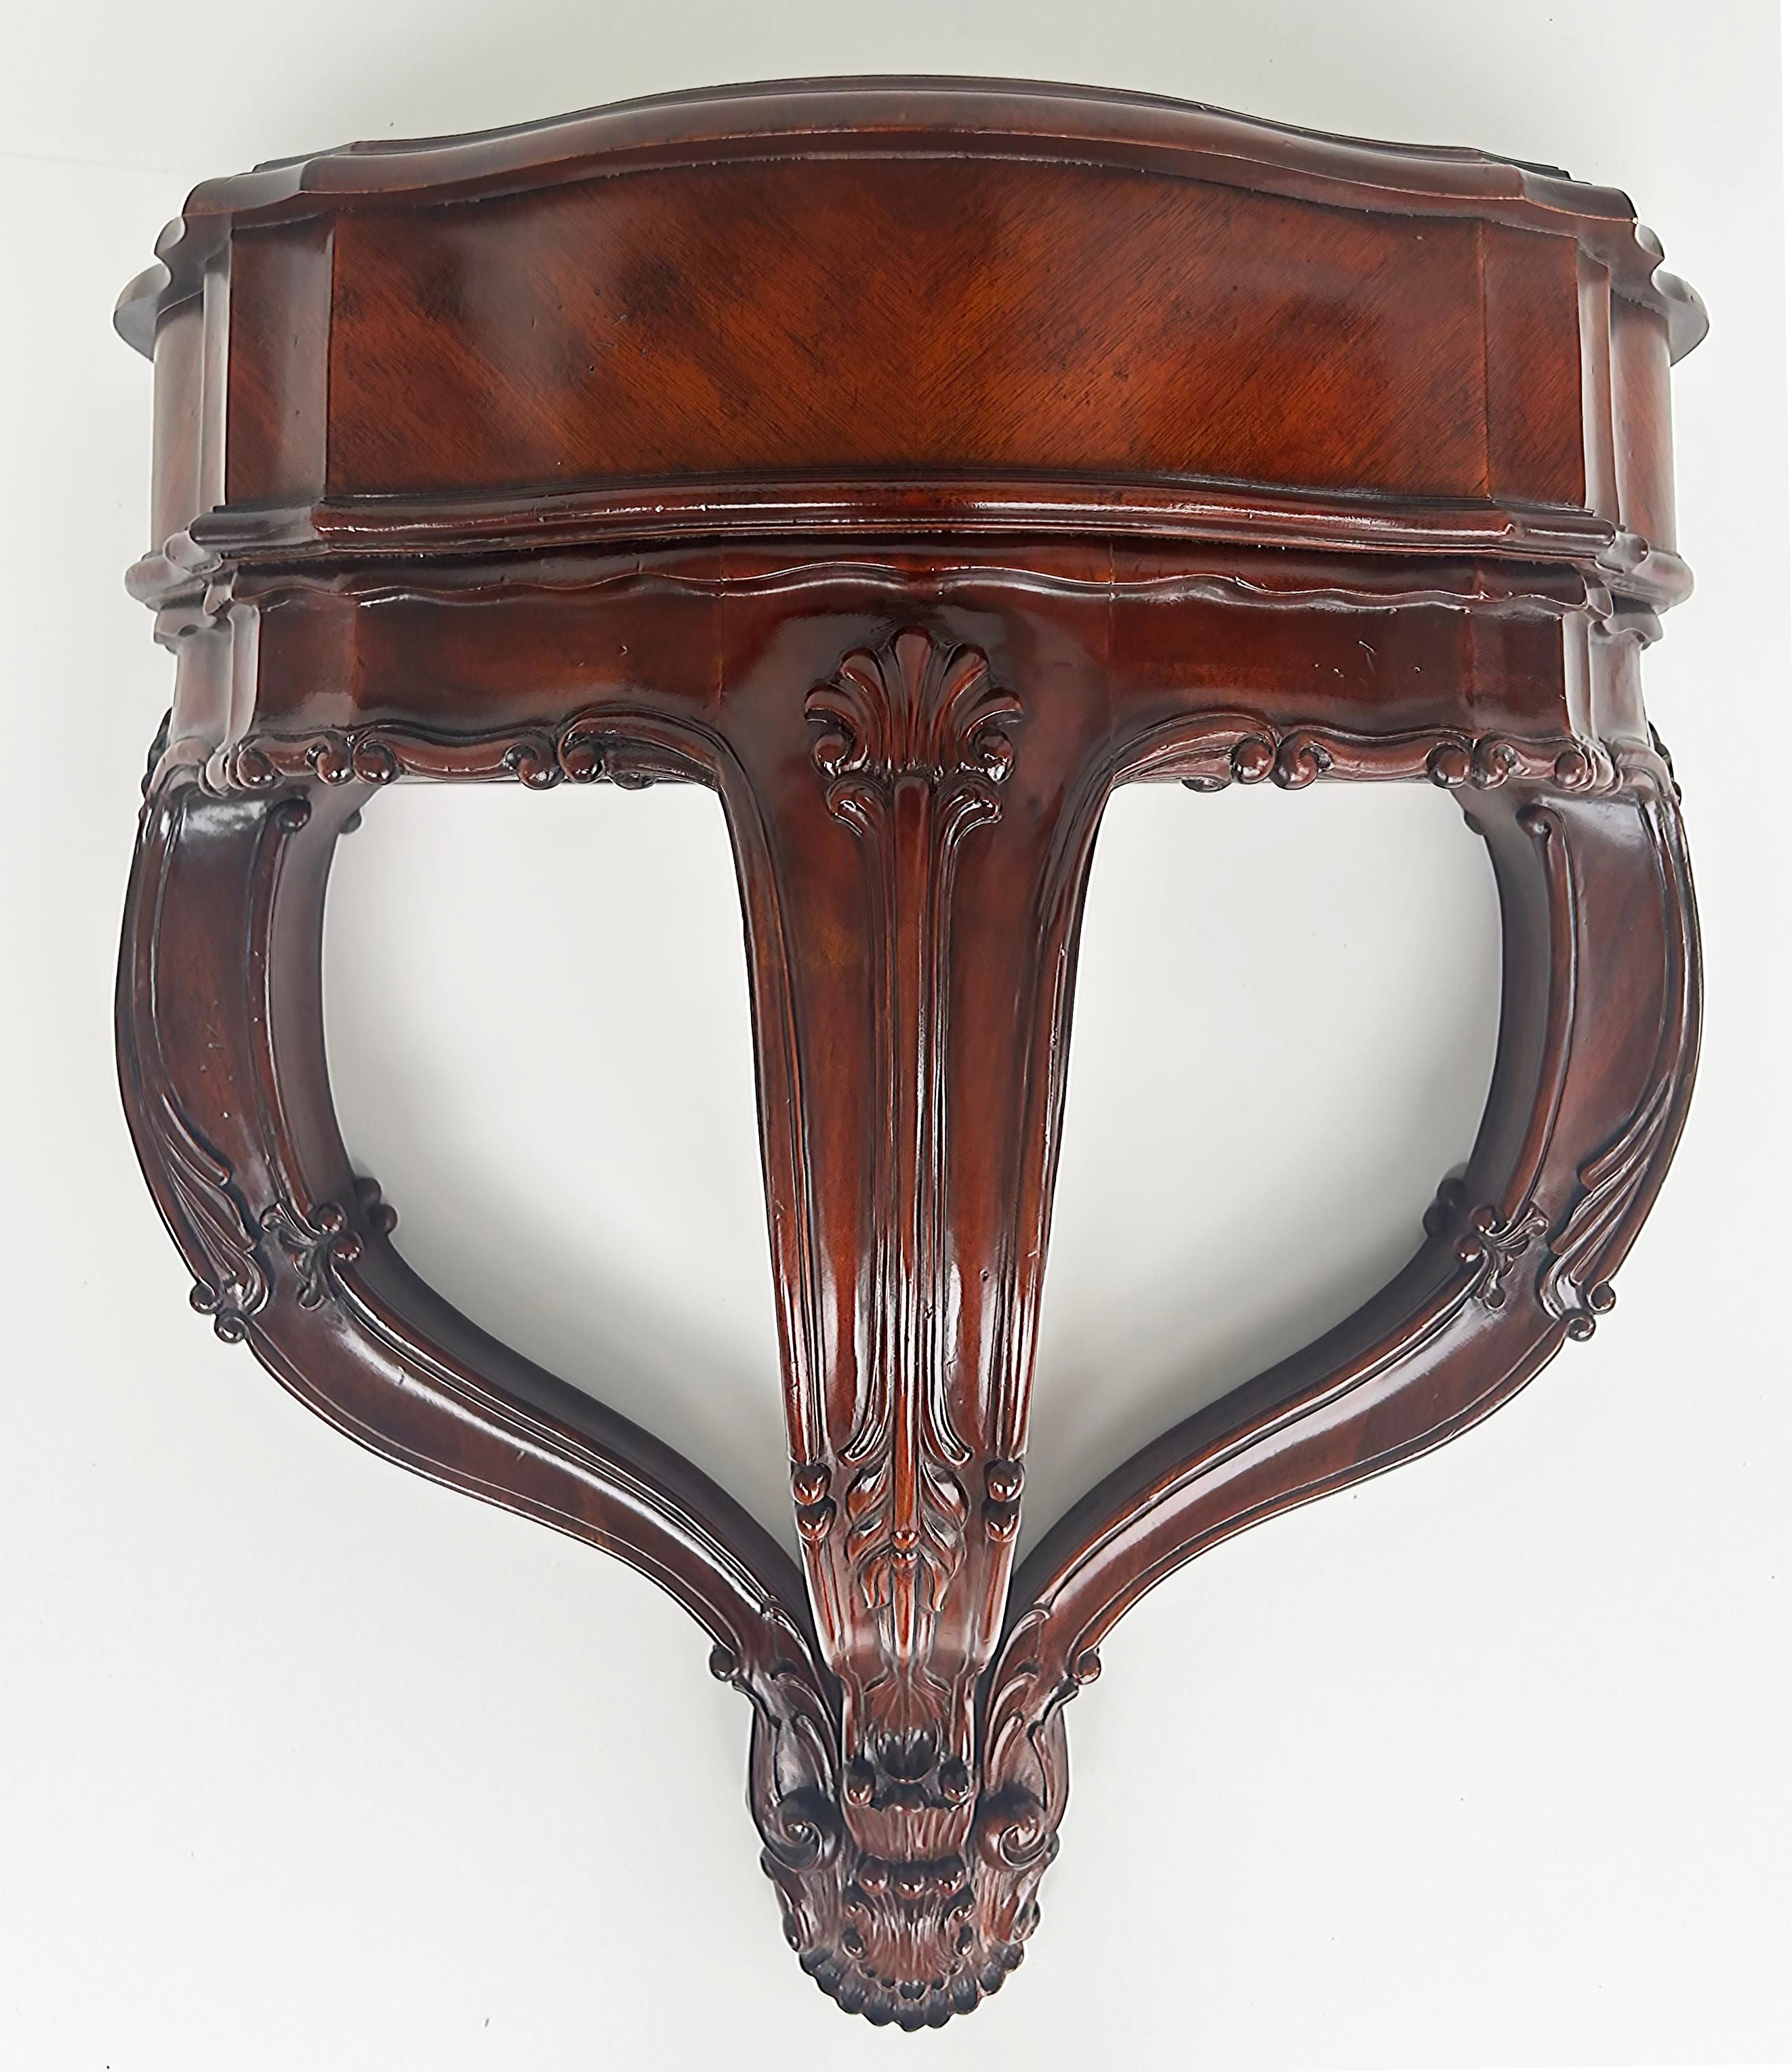 Vintage Diminutive Wall-mounted Shell Carved Console Table in Mahogany

Offered for sale is a wall-mounted diminutive beautifully carved console table with a decorative shell motif. The console has brackets on the back to secure to the wall and the